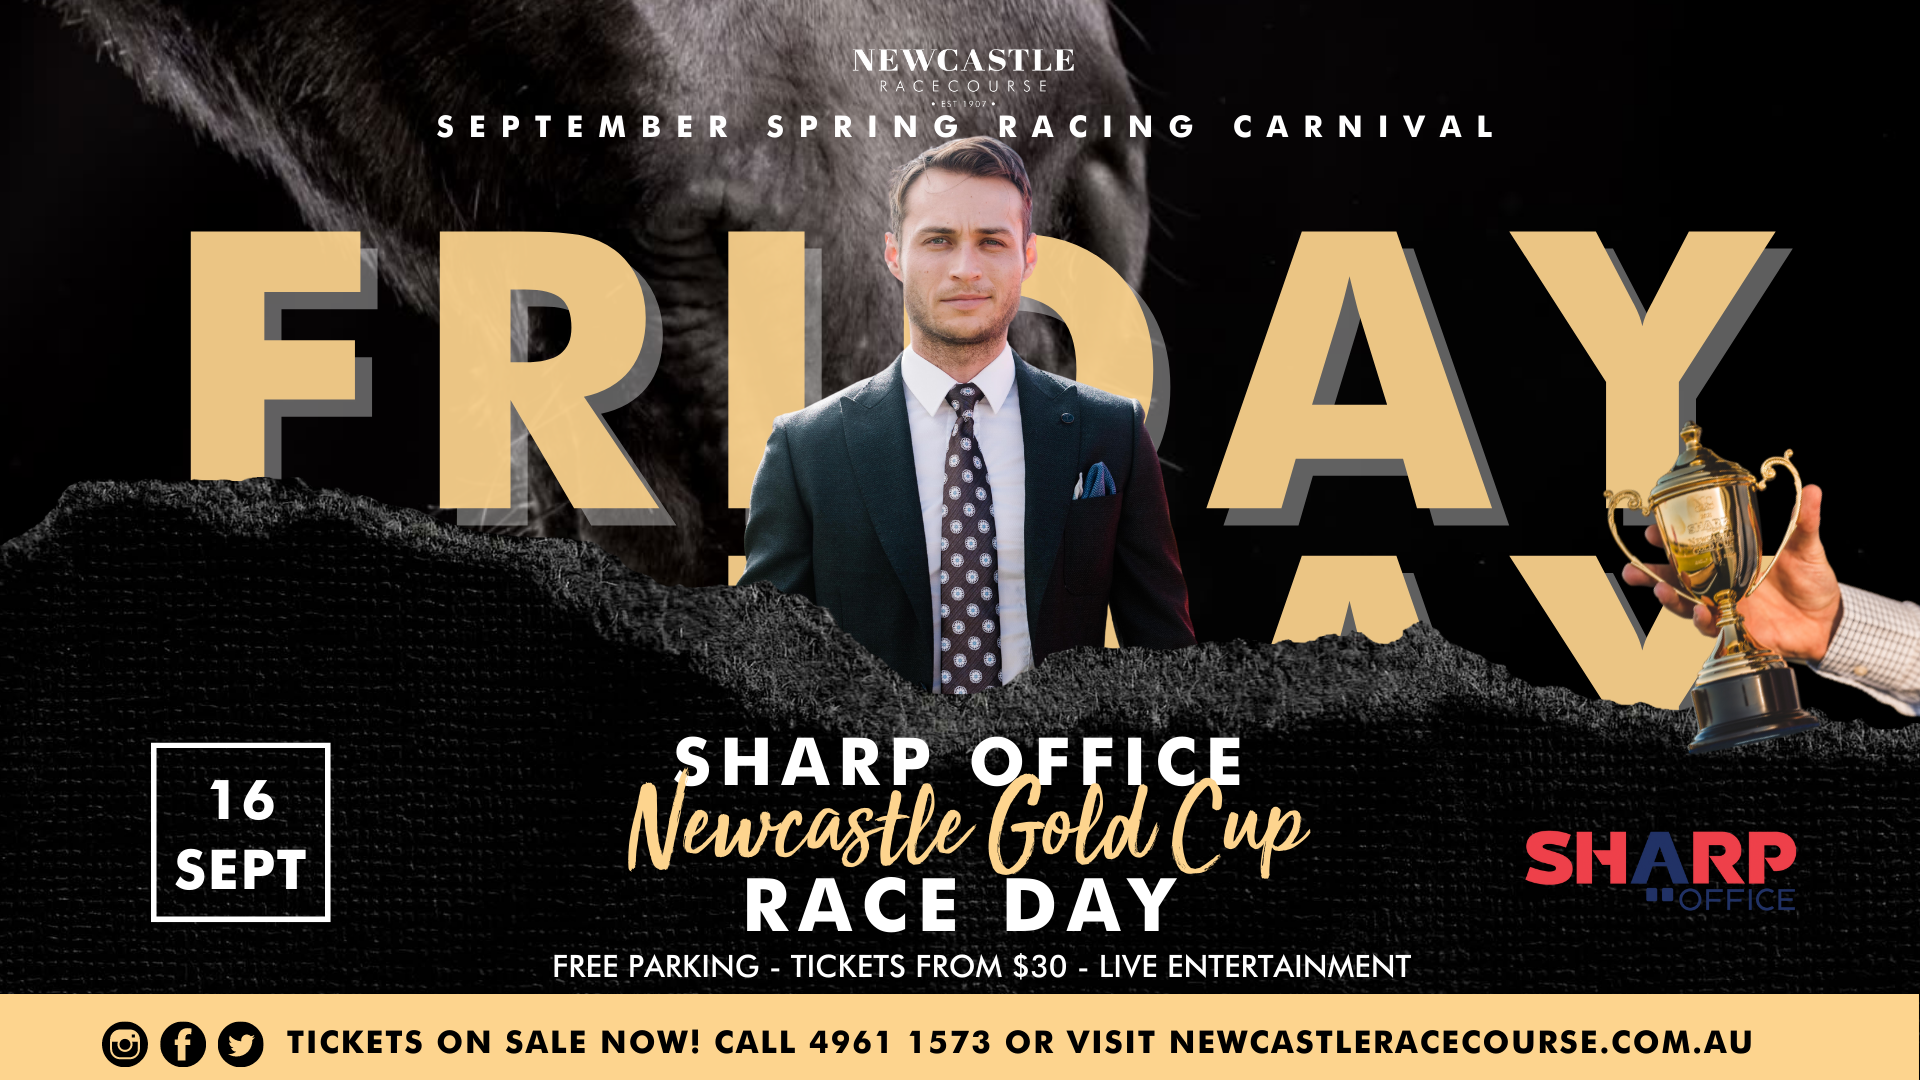 Sharp Office Newcastle Gold Cup Race Day